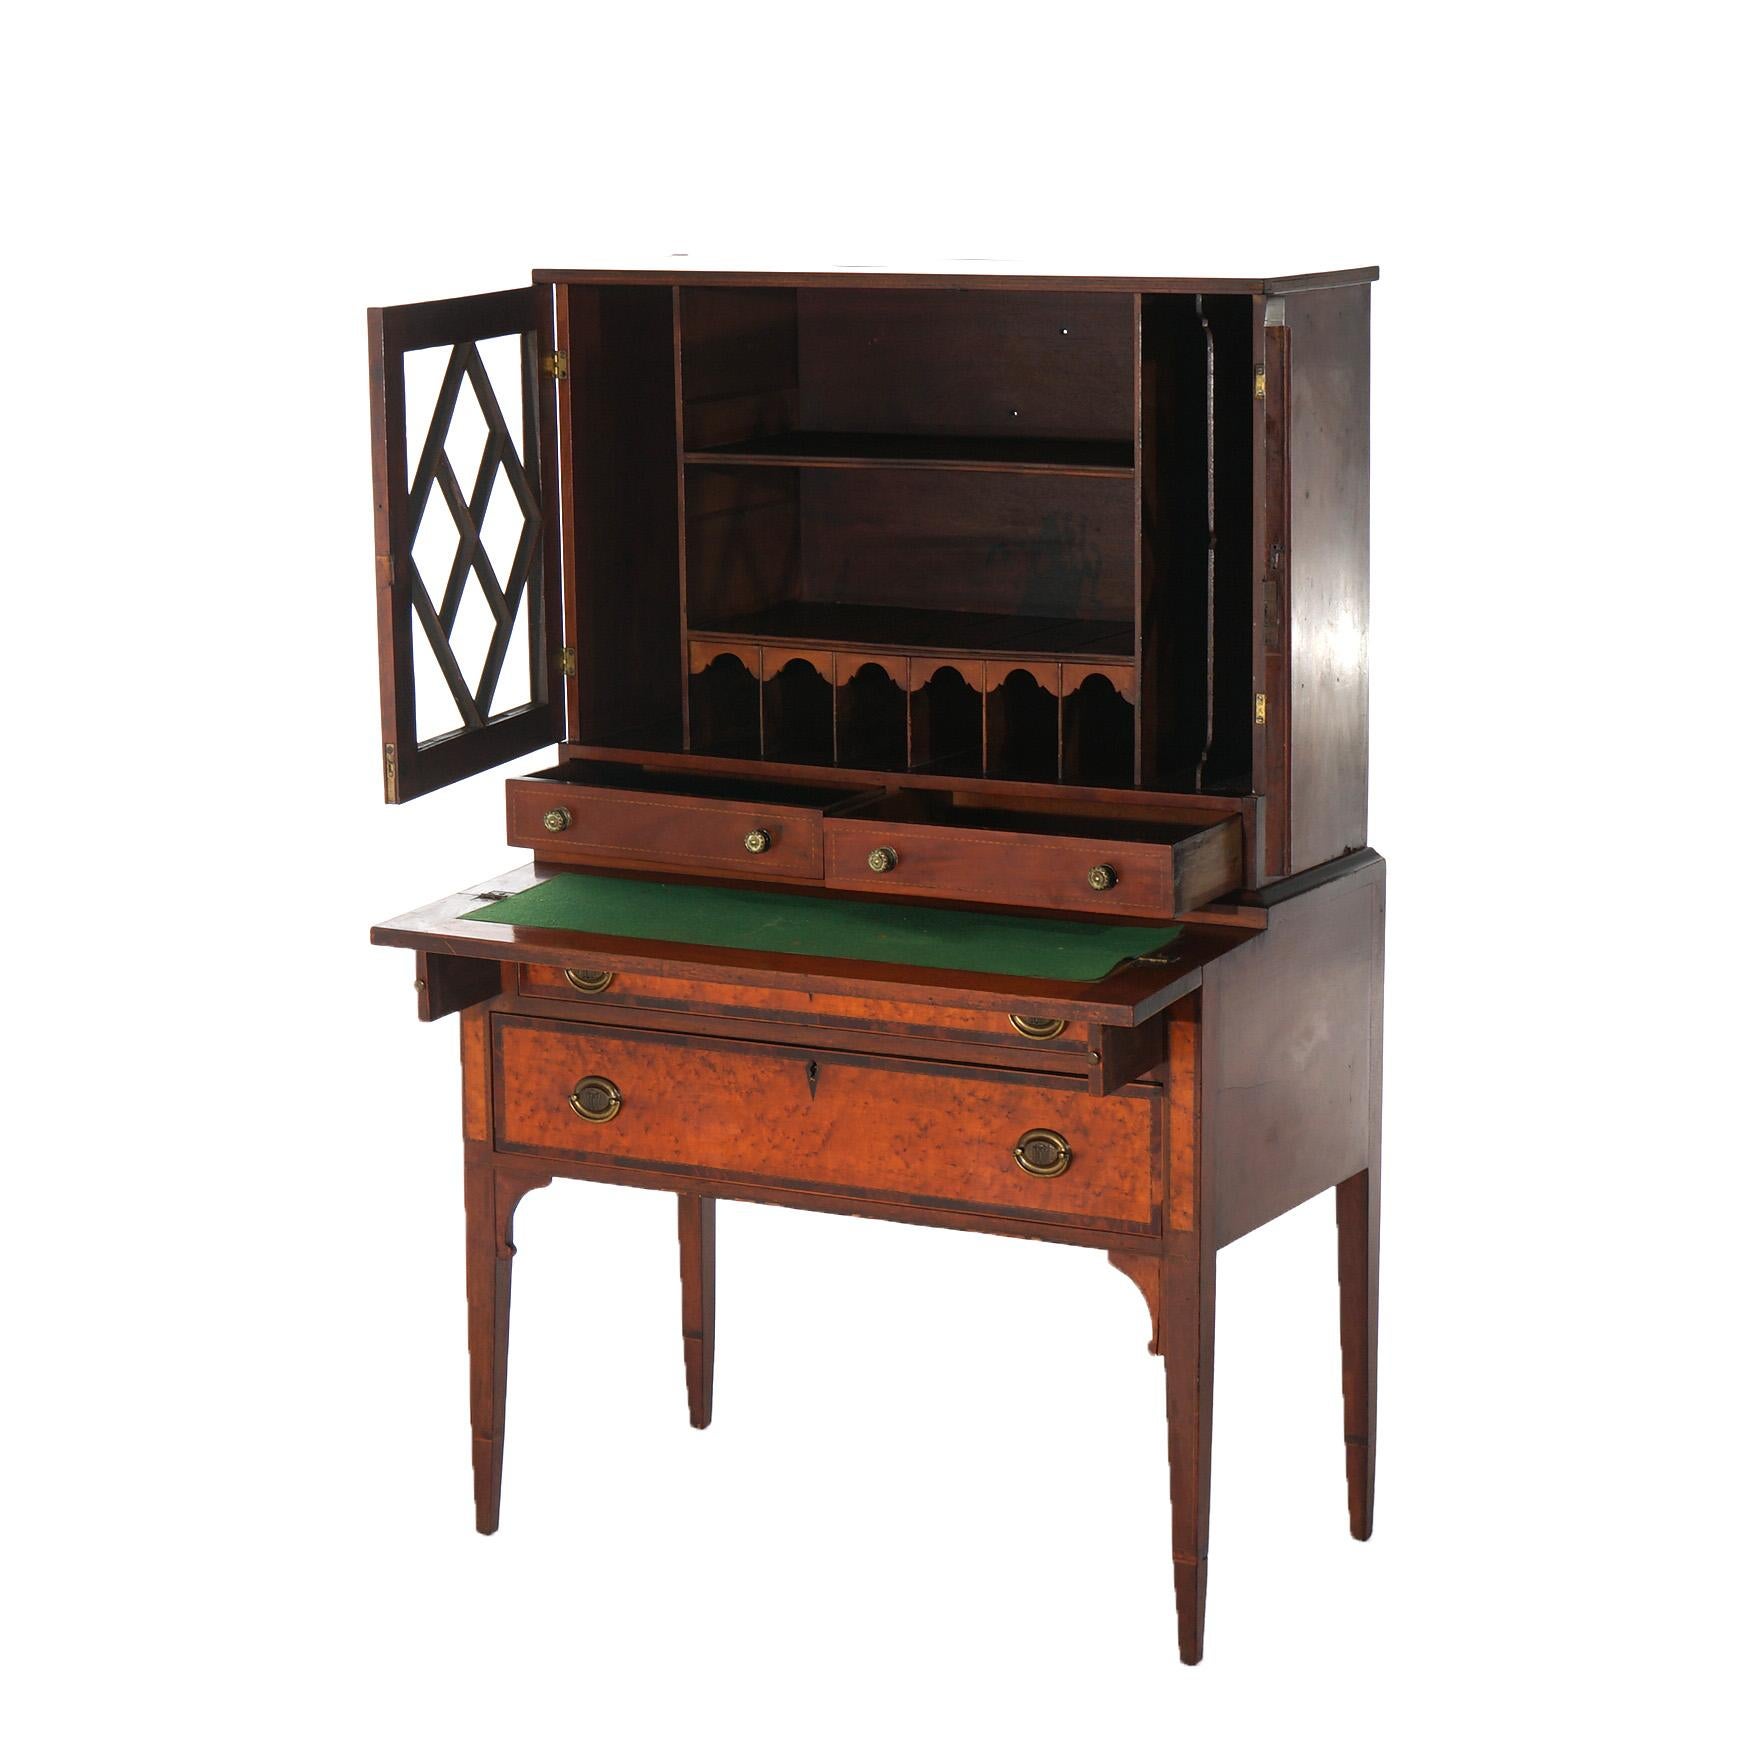 ***Ask About Reduced In-House Shipping Rates - Reliable Service & Fully Insured***
An antique Federal or Hepplewhite secretary offers birdseye maple and mahogany construction with upper case having double lattice and glass doors opening to shelved